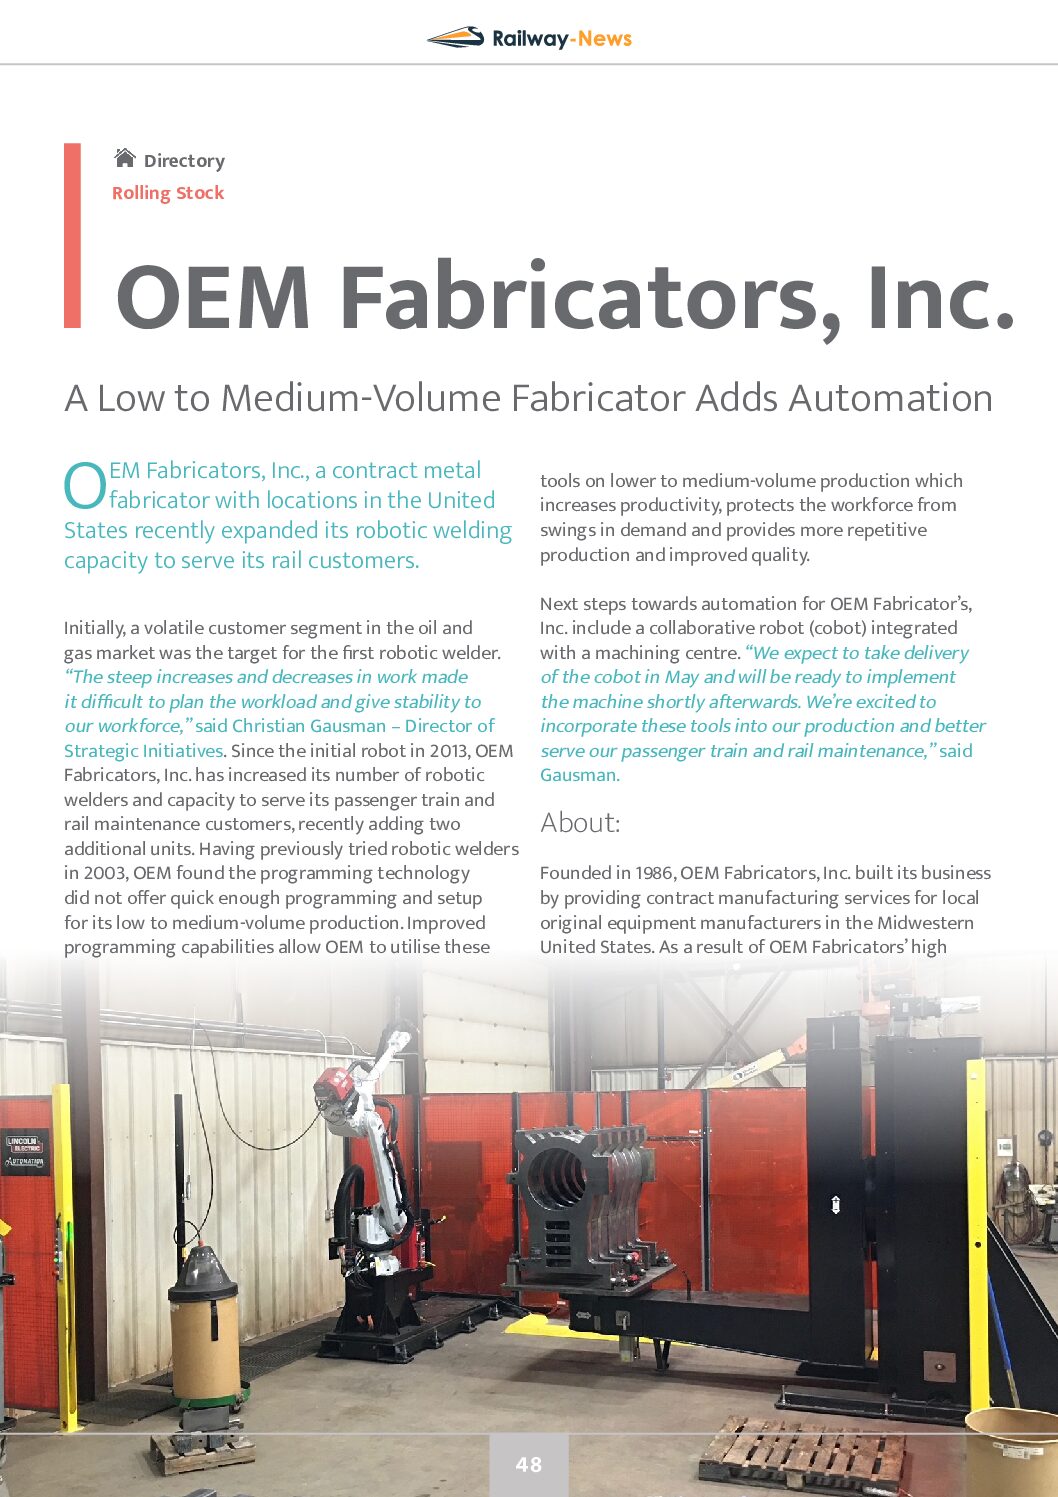 A Low to Medium-Volume Fabricator Adds Automation